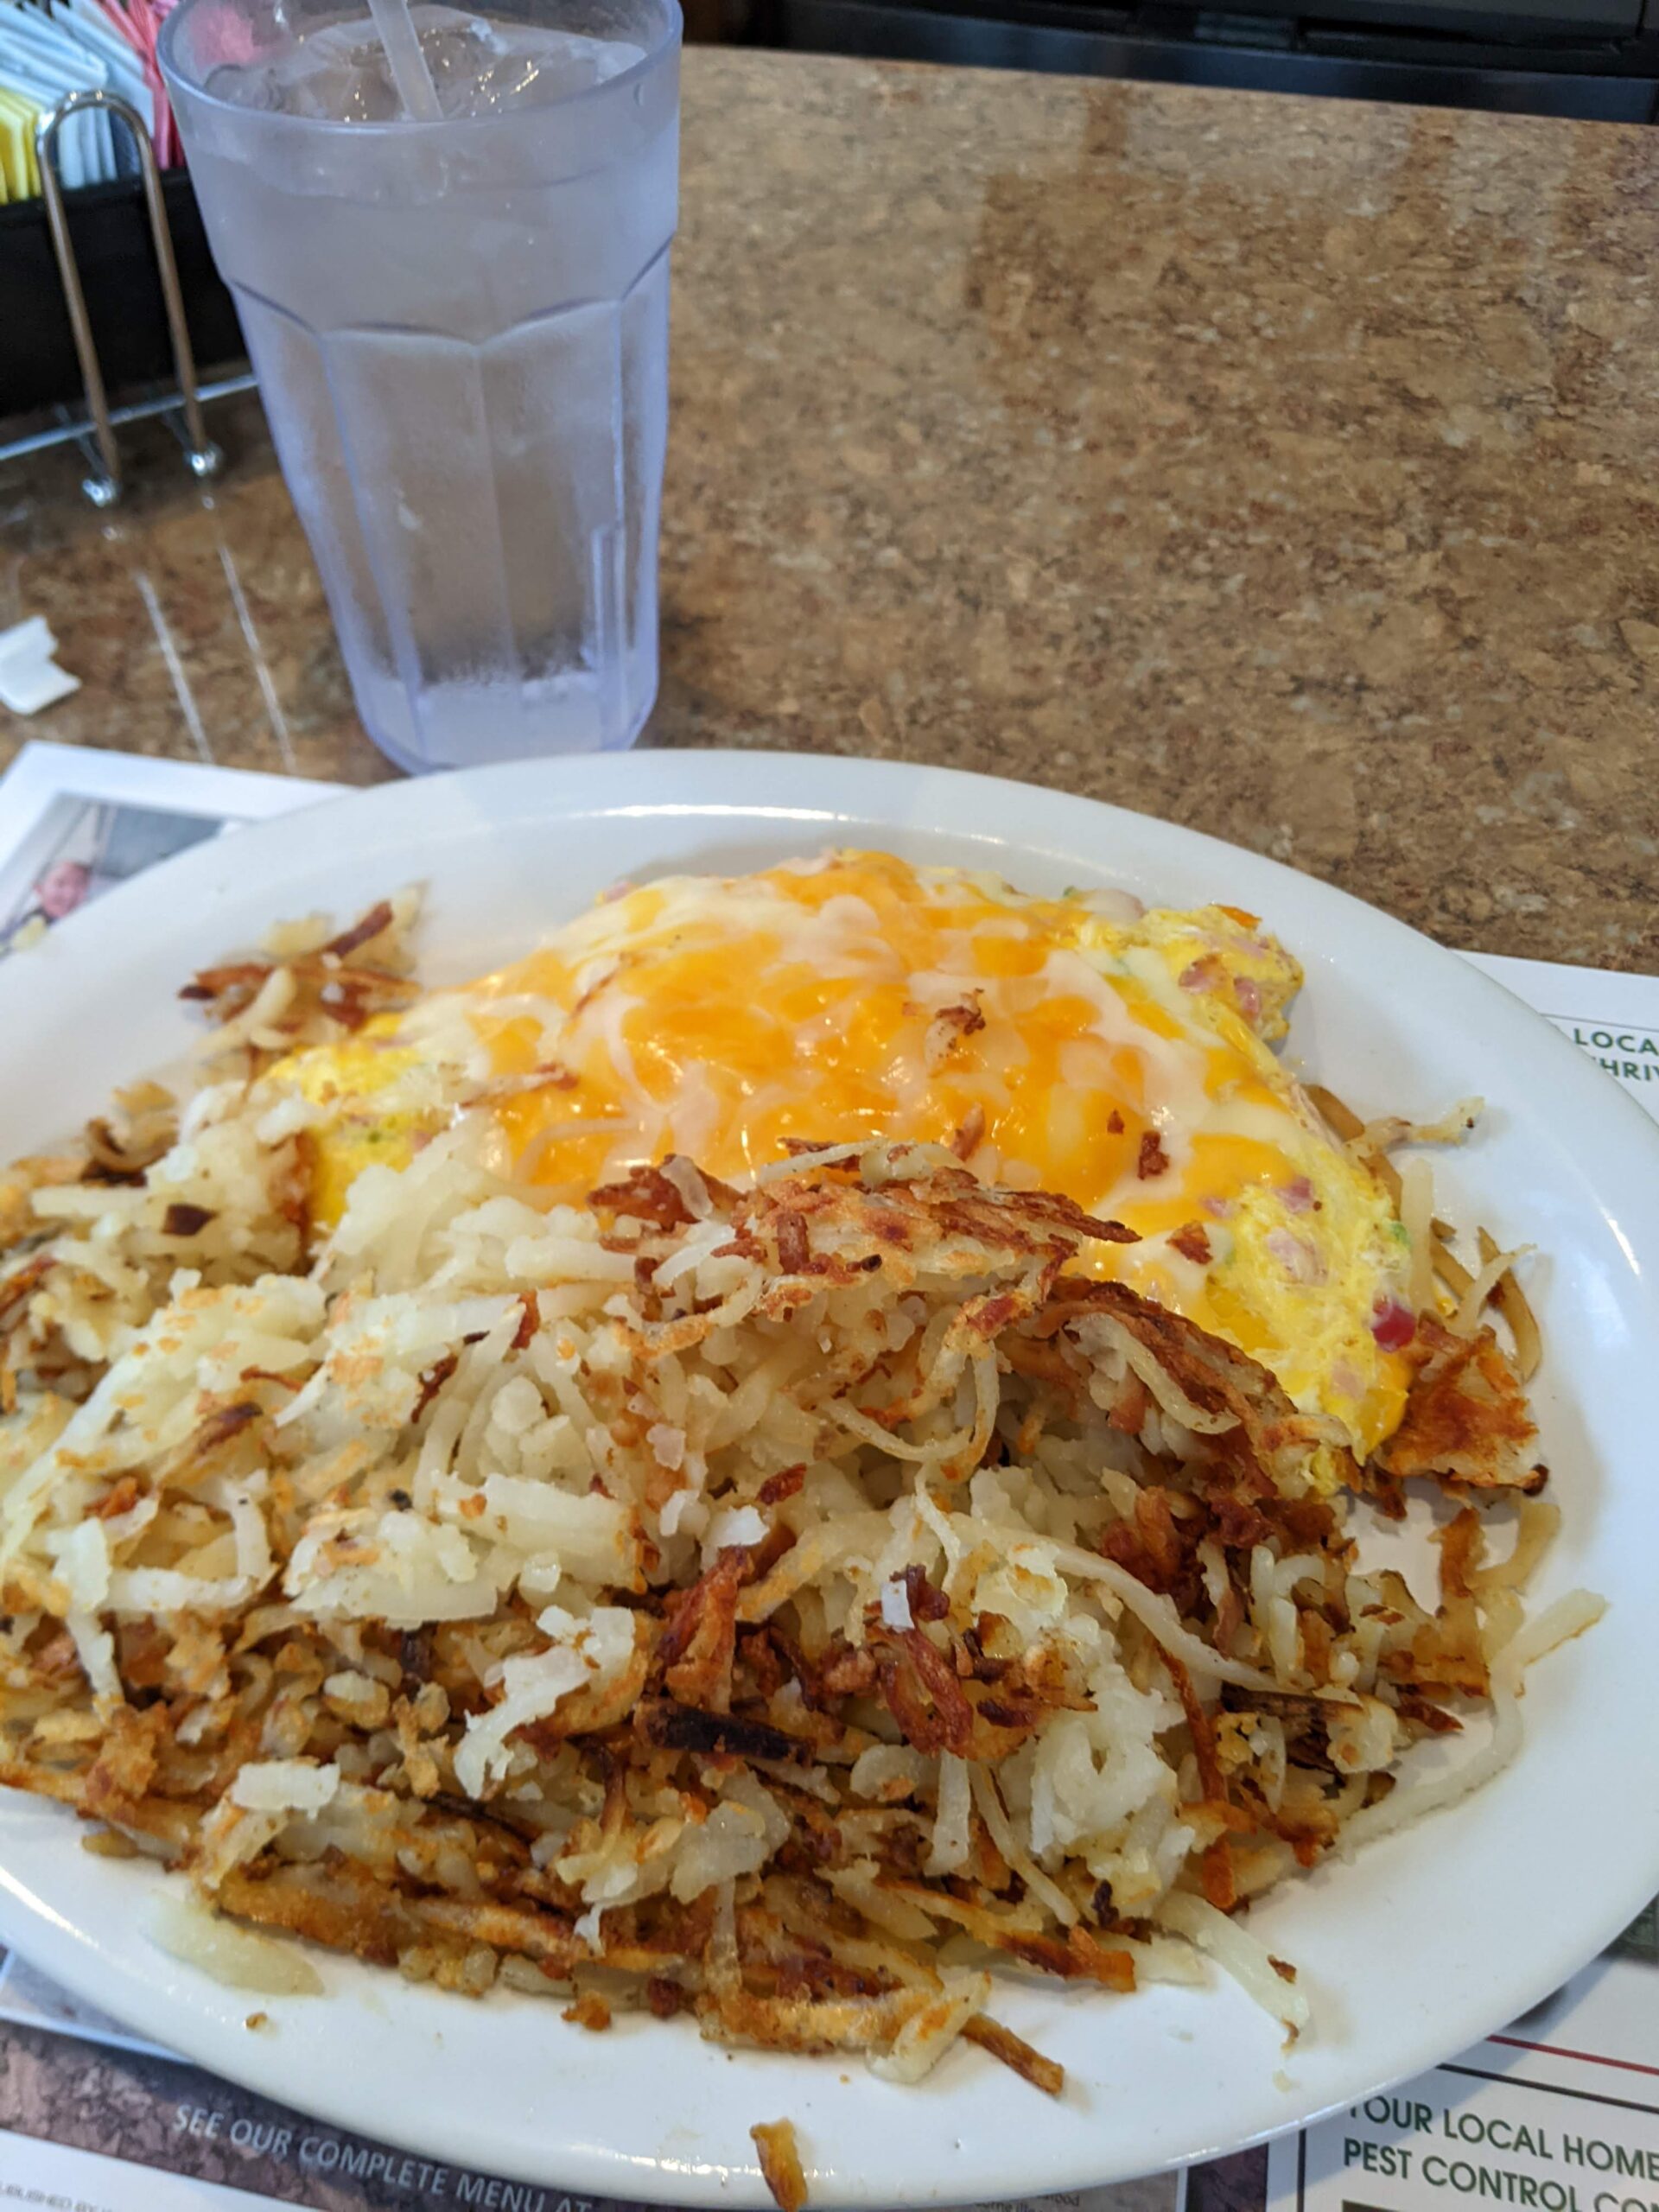 Picture of shredded hashbrowns with cheese on top